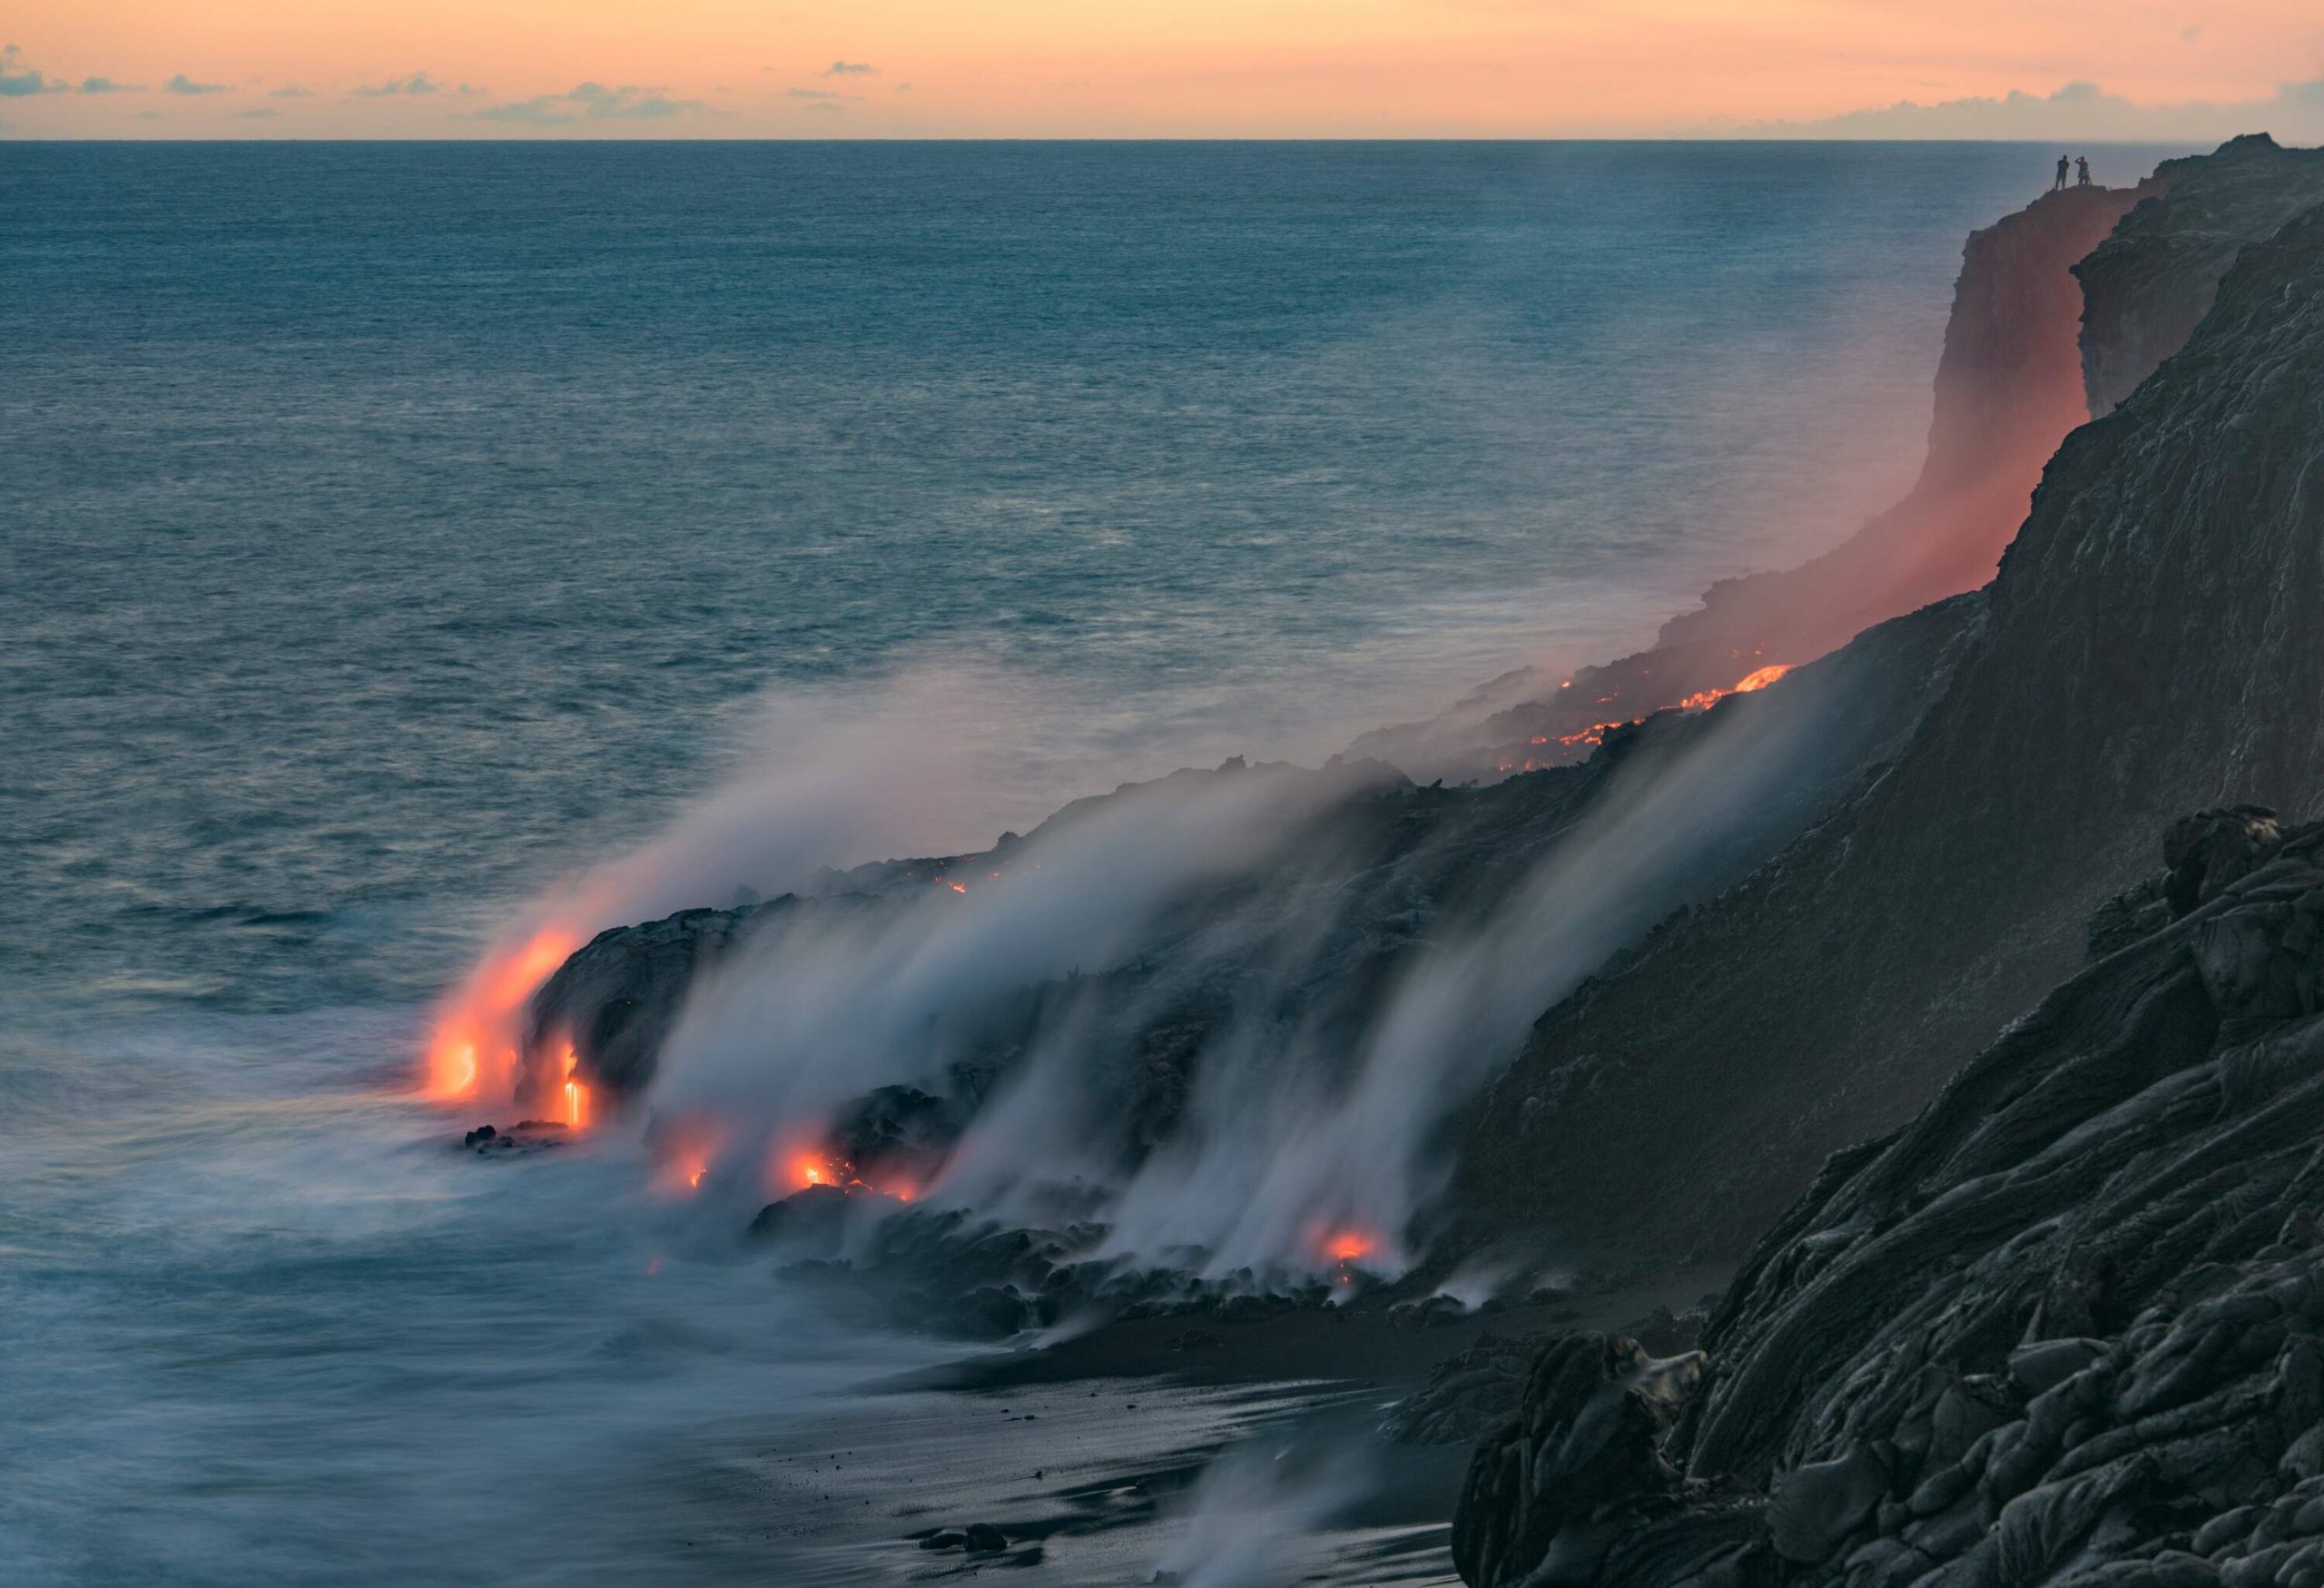 Molten lava flowing to the edge of the sea, emitting smoke as it touches the water, and a silhouette of two people standing on the peak.